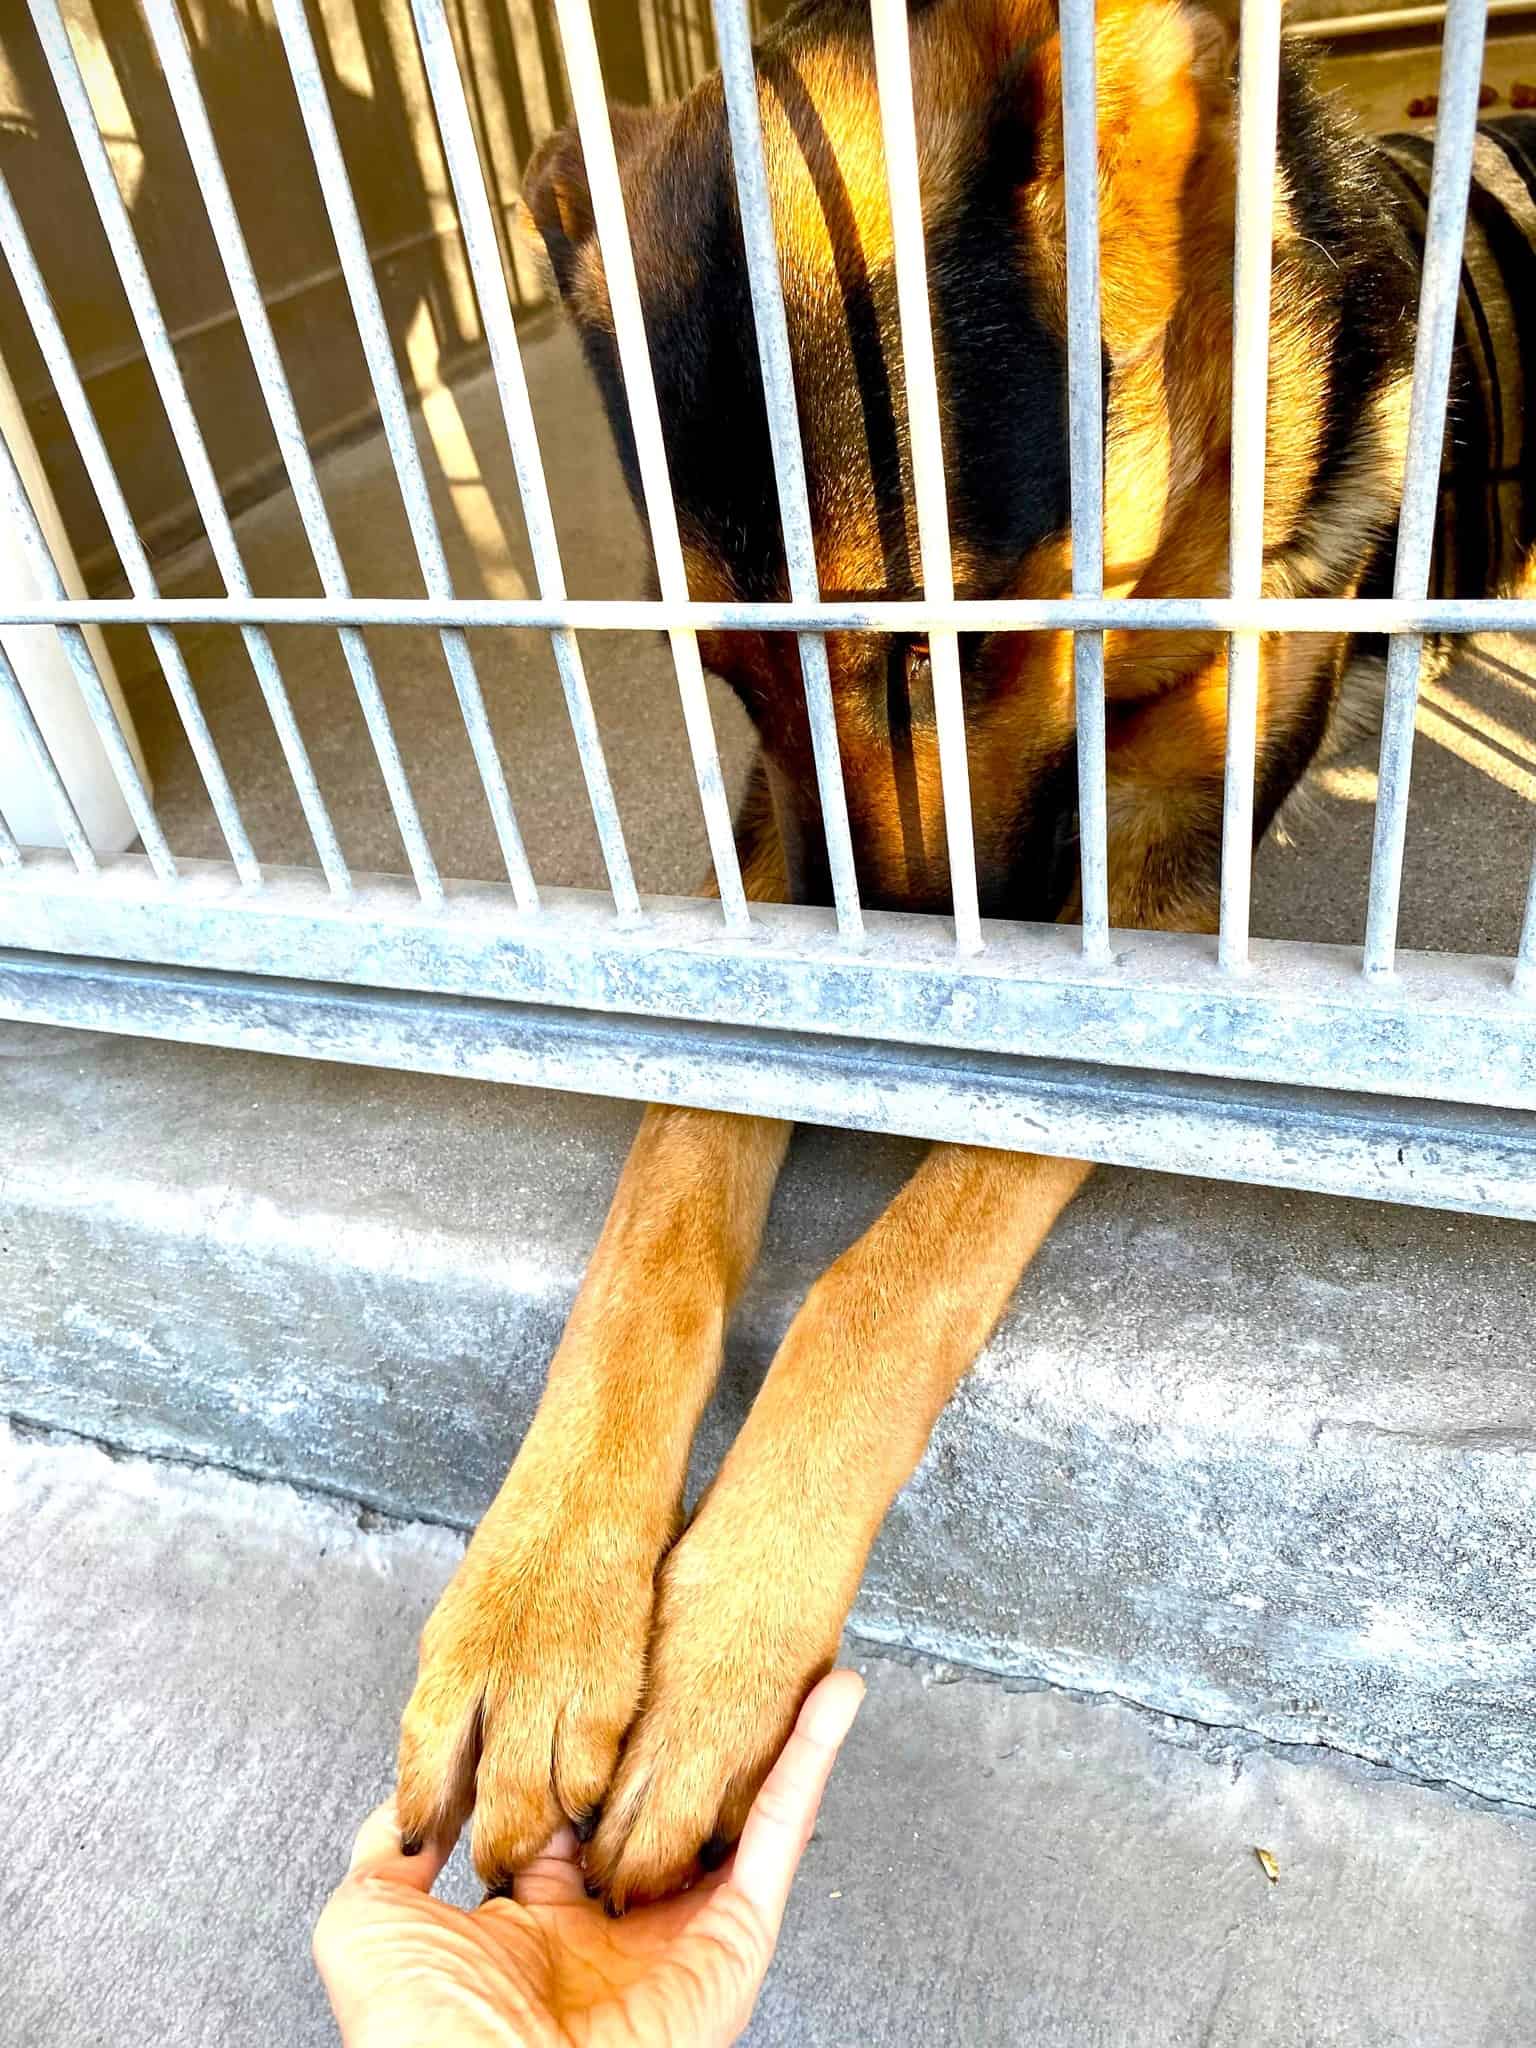 Dog giving both of his hands trough cage